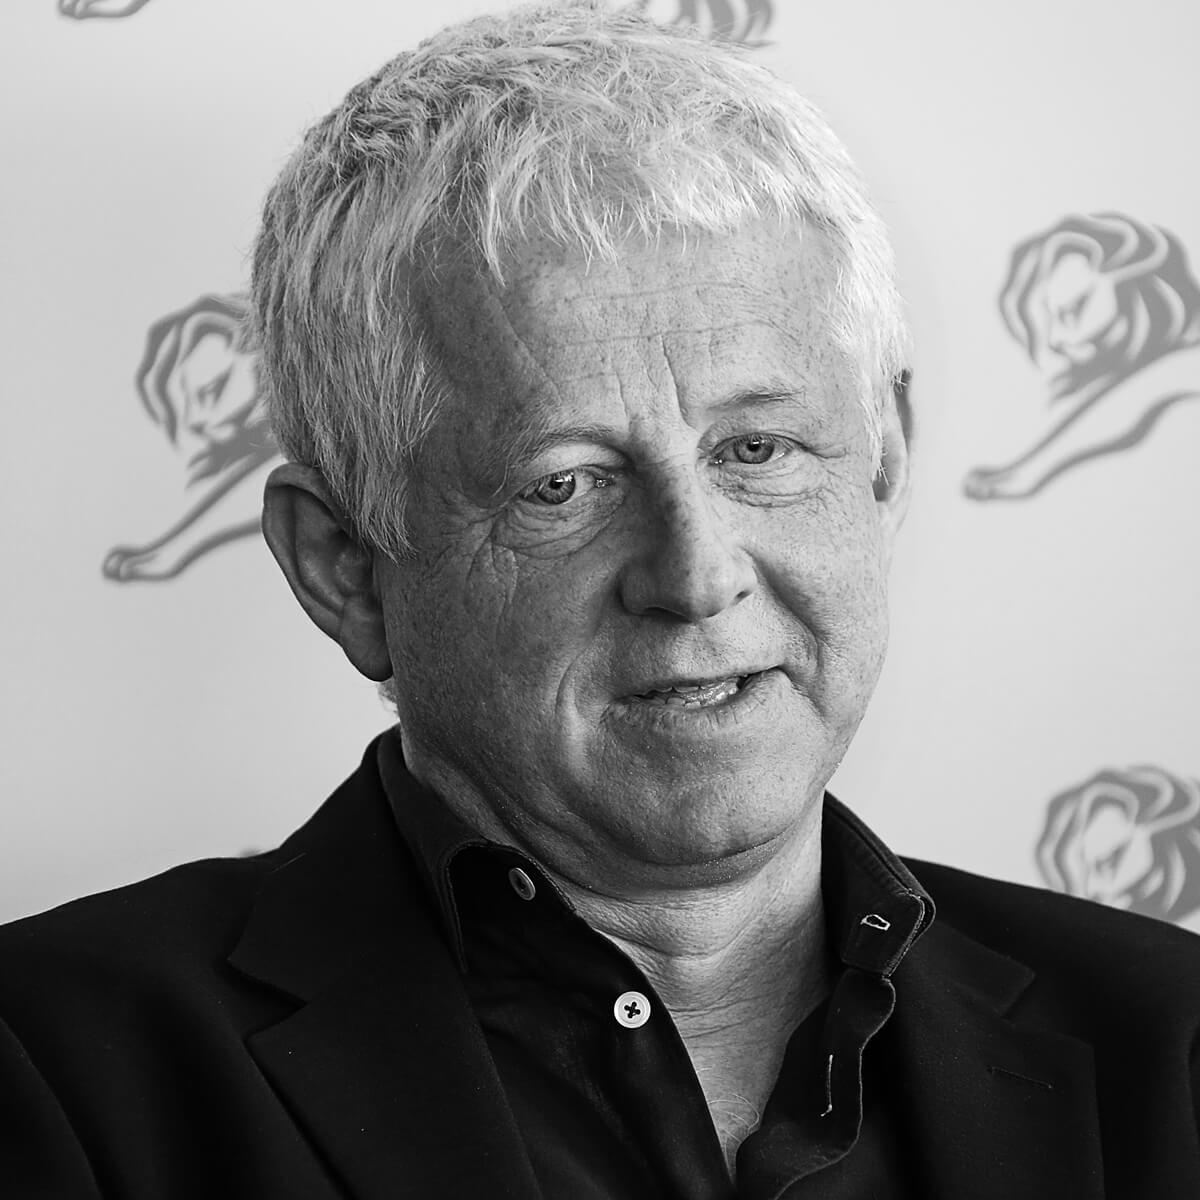 Portrait of Screenwriter Richard Curtis by Julian Hanford at Cannes Lions 2017